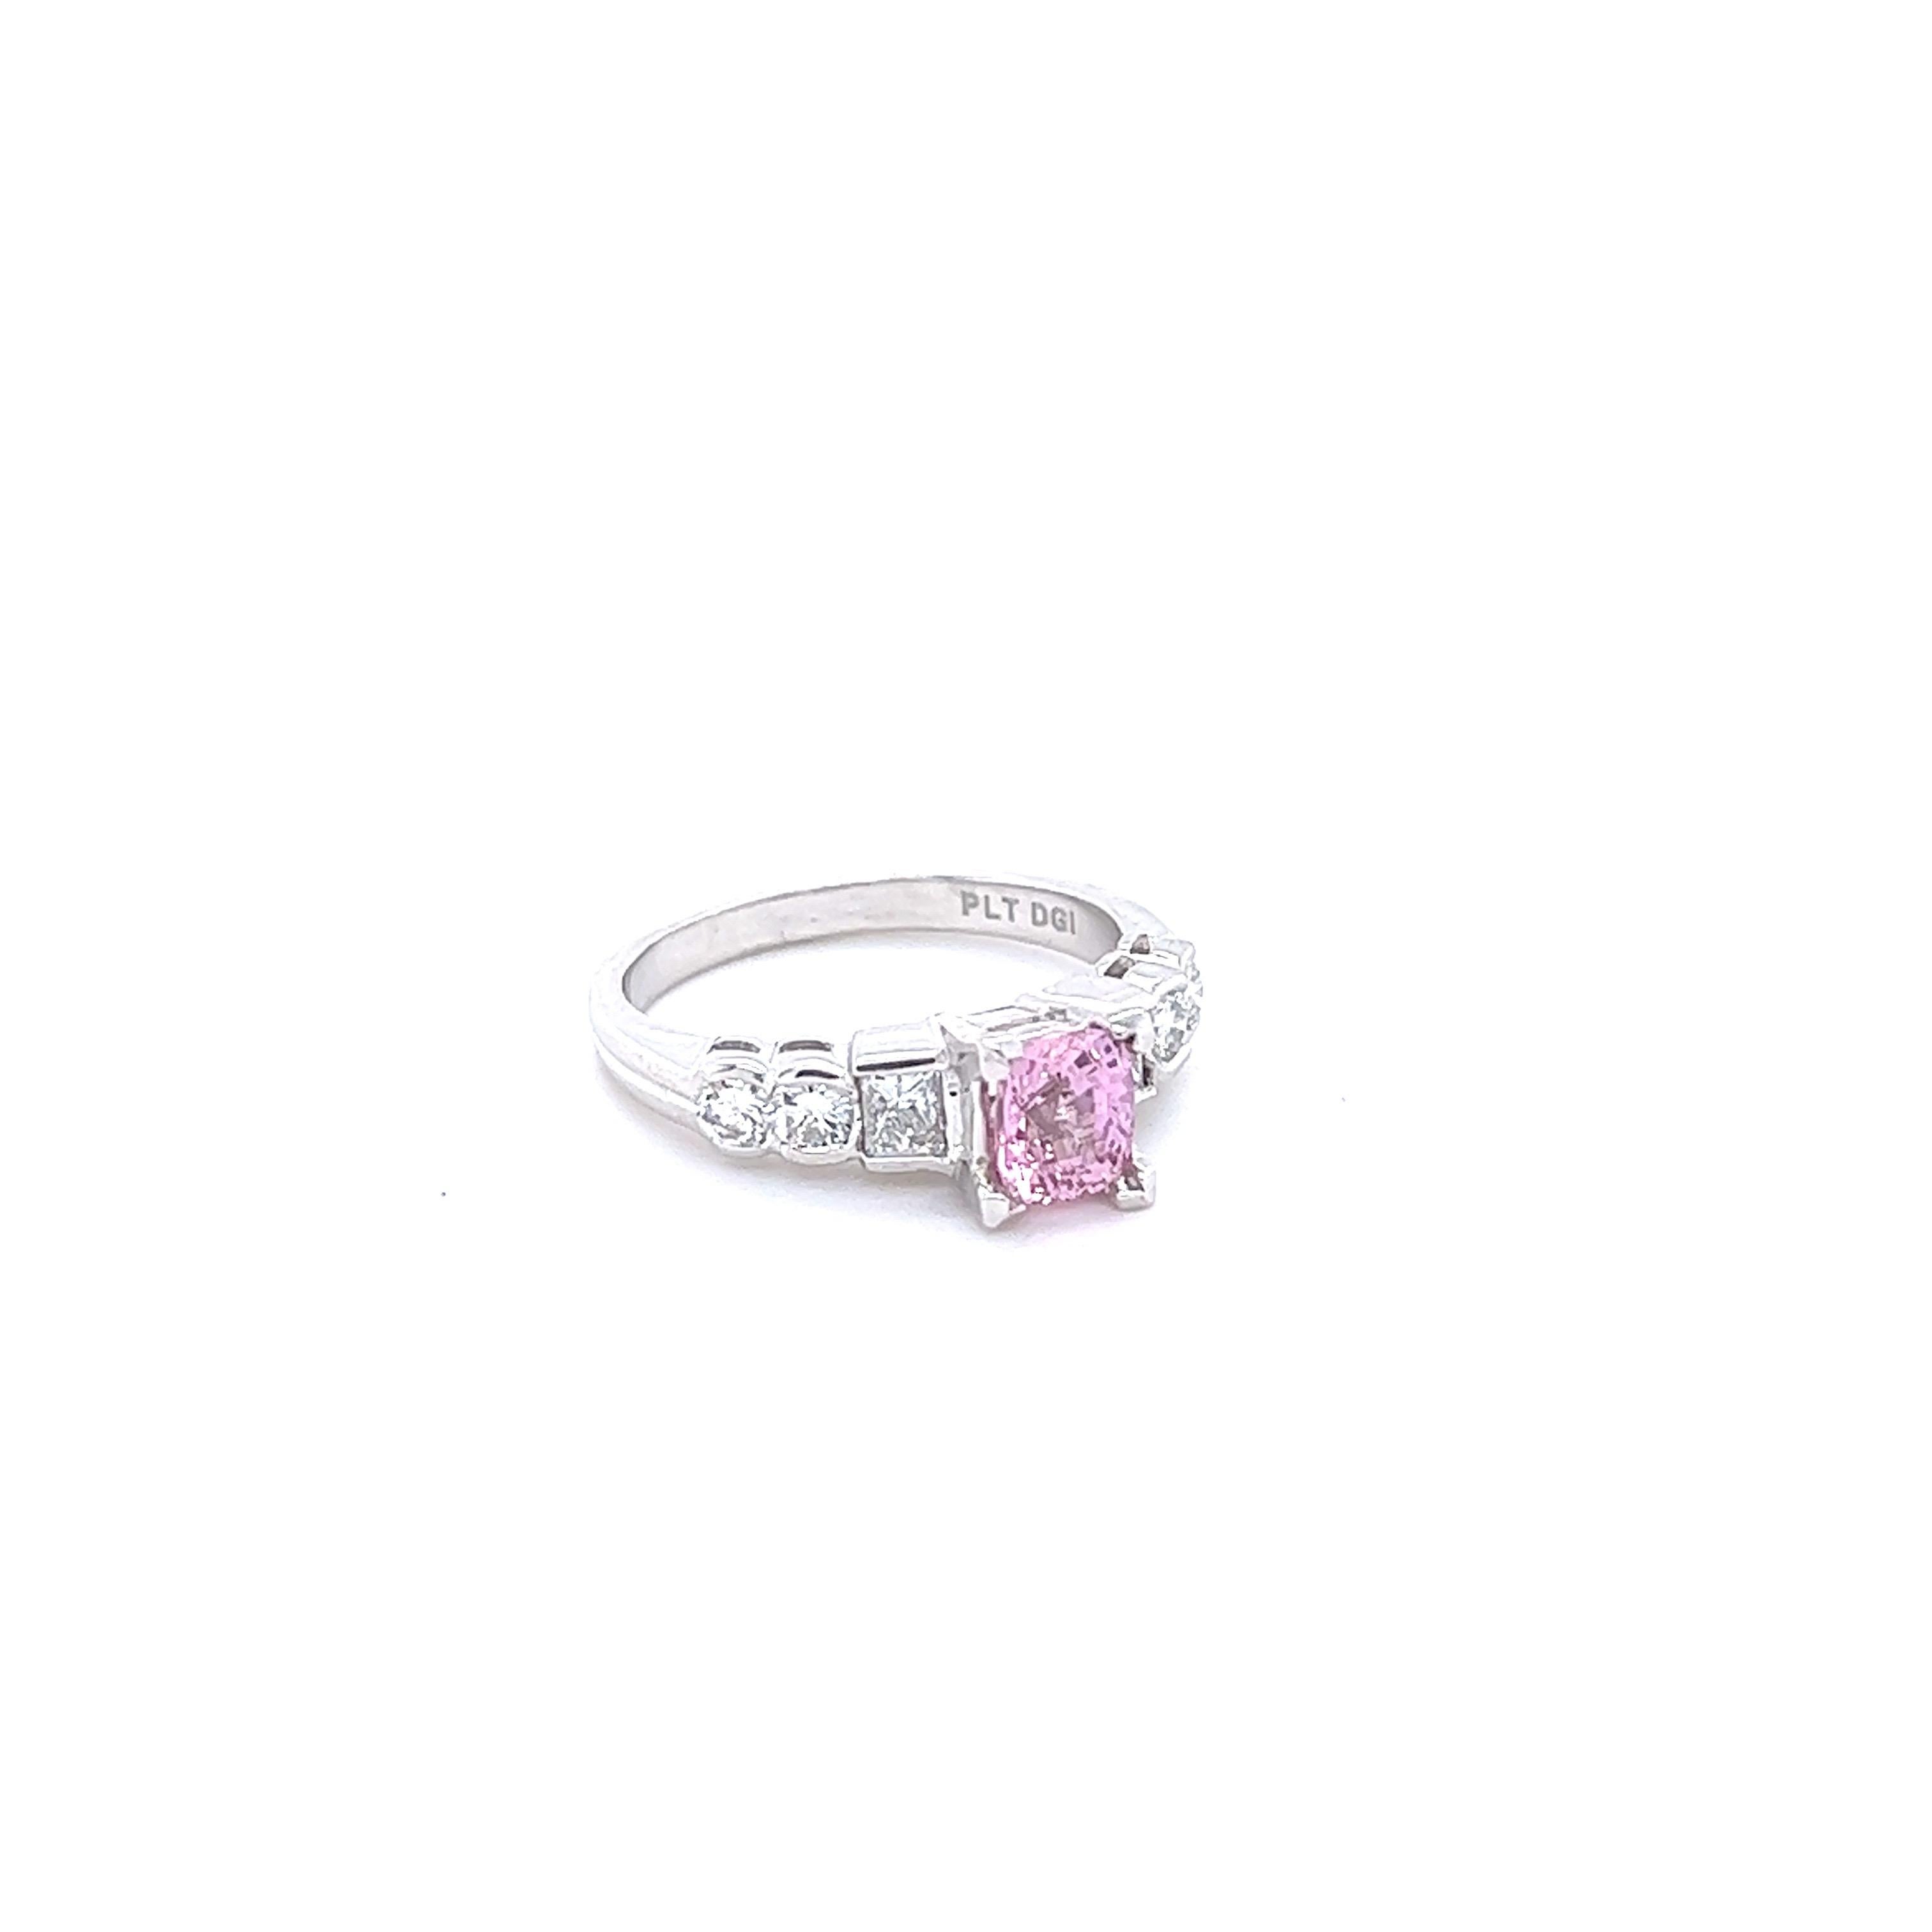 diamond ring with pink sapphire side stones